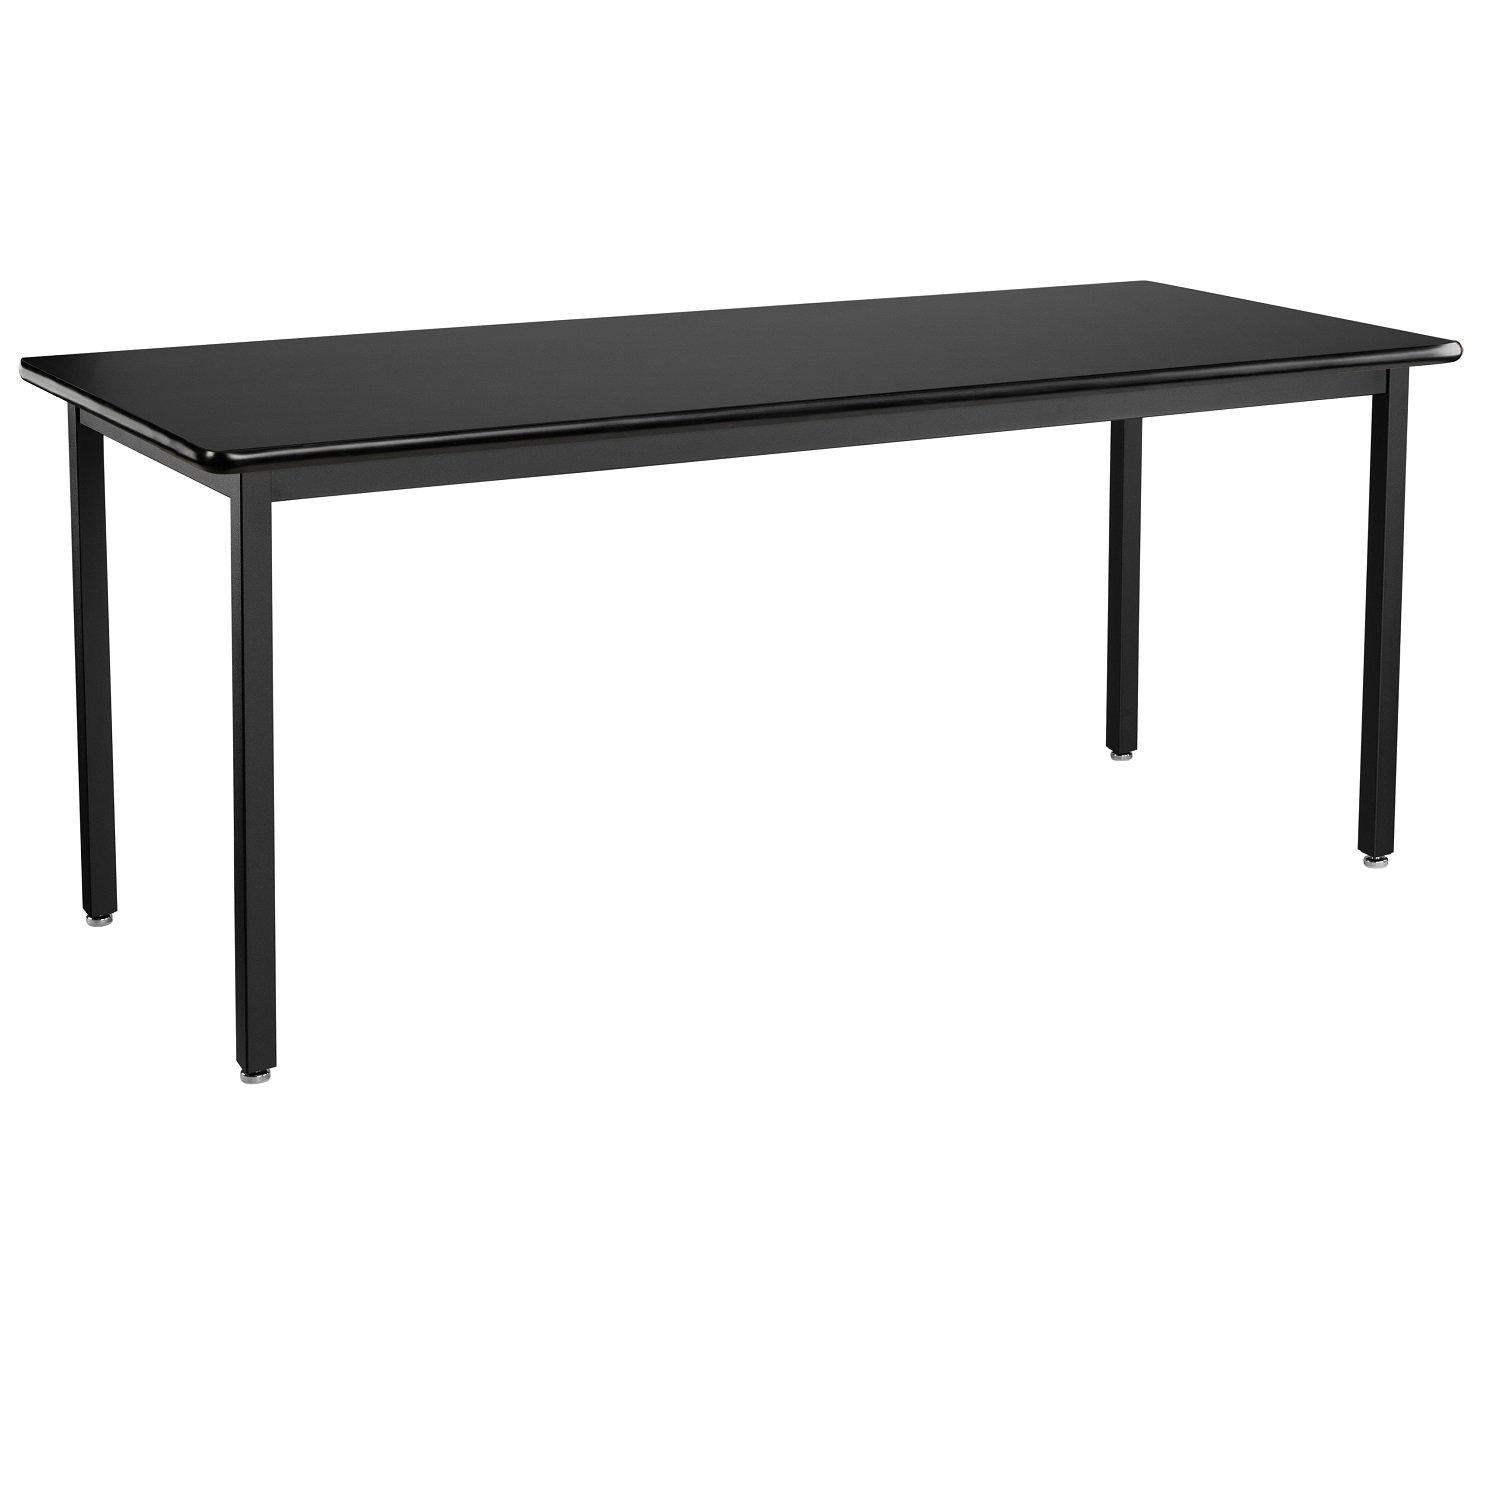 Heavy-Duty Fixed Height Utility Table, Black Frame, 24" x 72", High-Pressure Laminate Top with T-Mold Edge